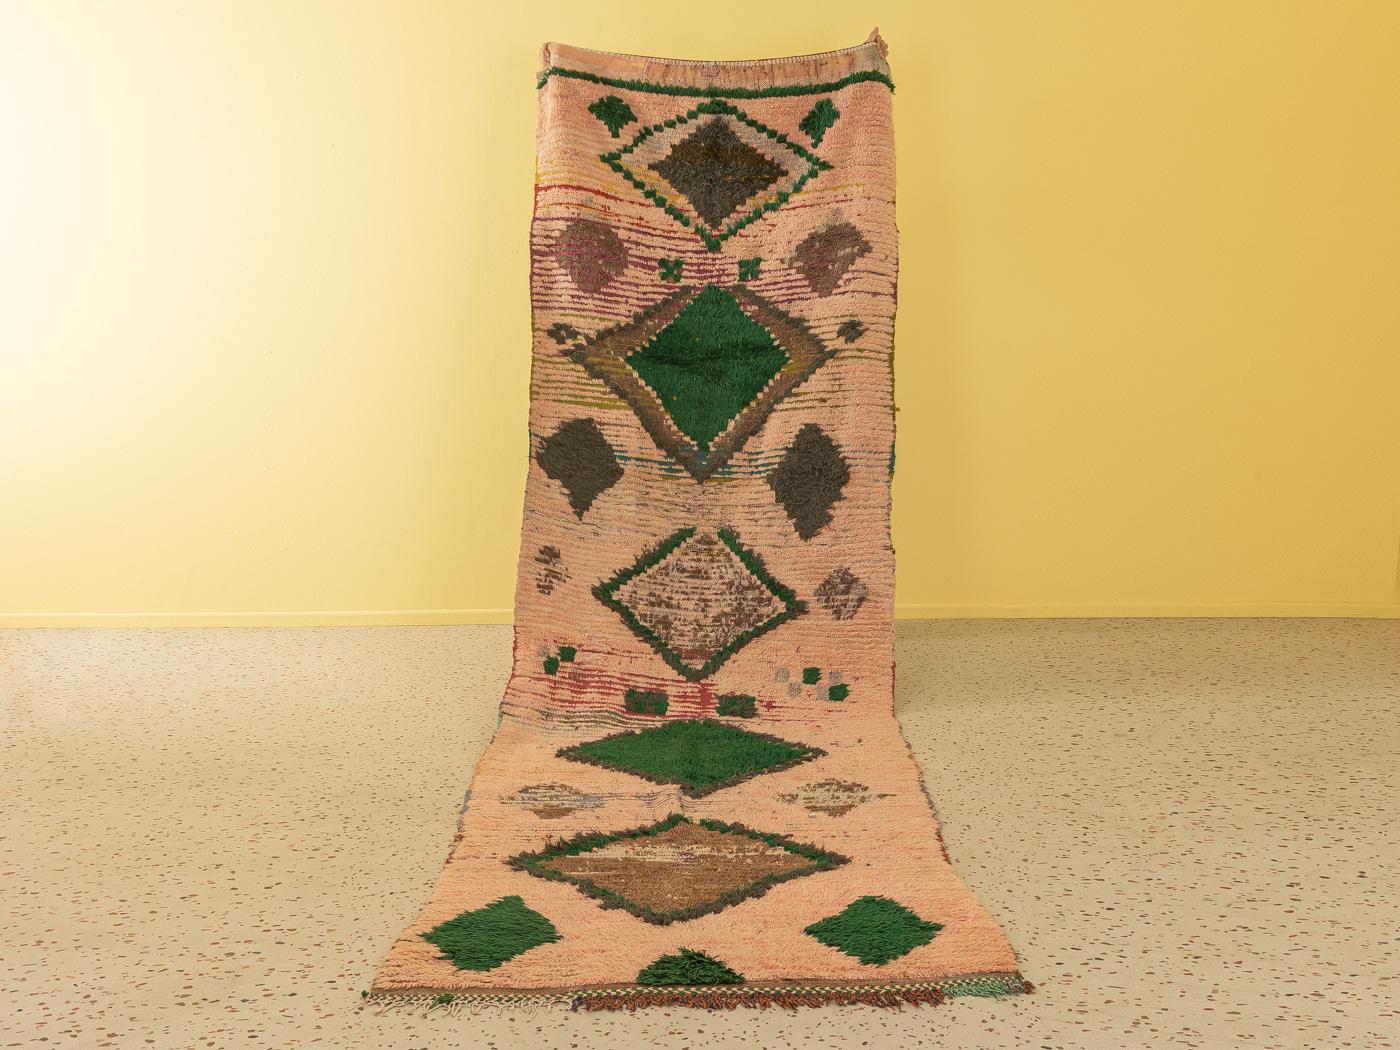 This Boujad is a vintage wool rug with some recycled wool parts – soft and comfortable underfoot. Our Berber rugs are handmade, one knot at a time. Each of our Berber rugs is a long-lasting one-of-a-kind piece, created in a sustainable manner with